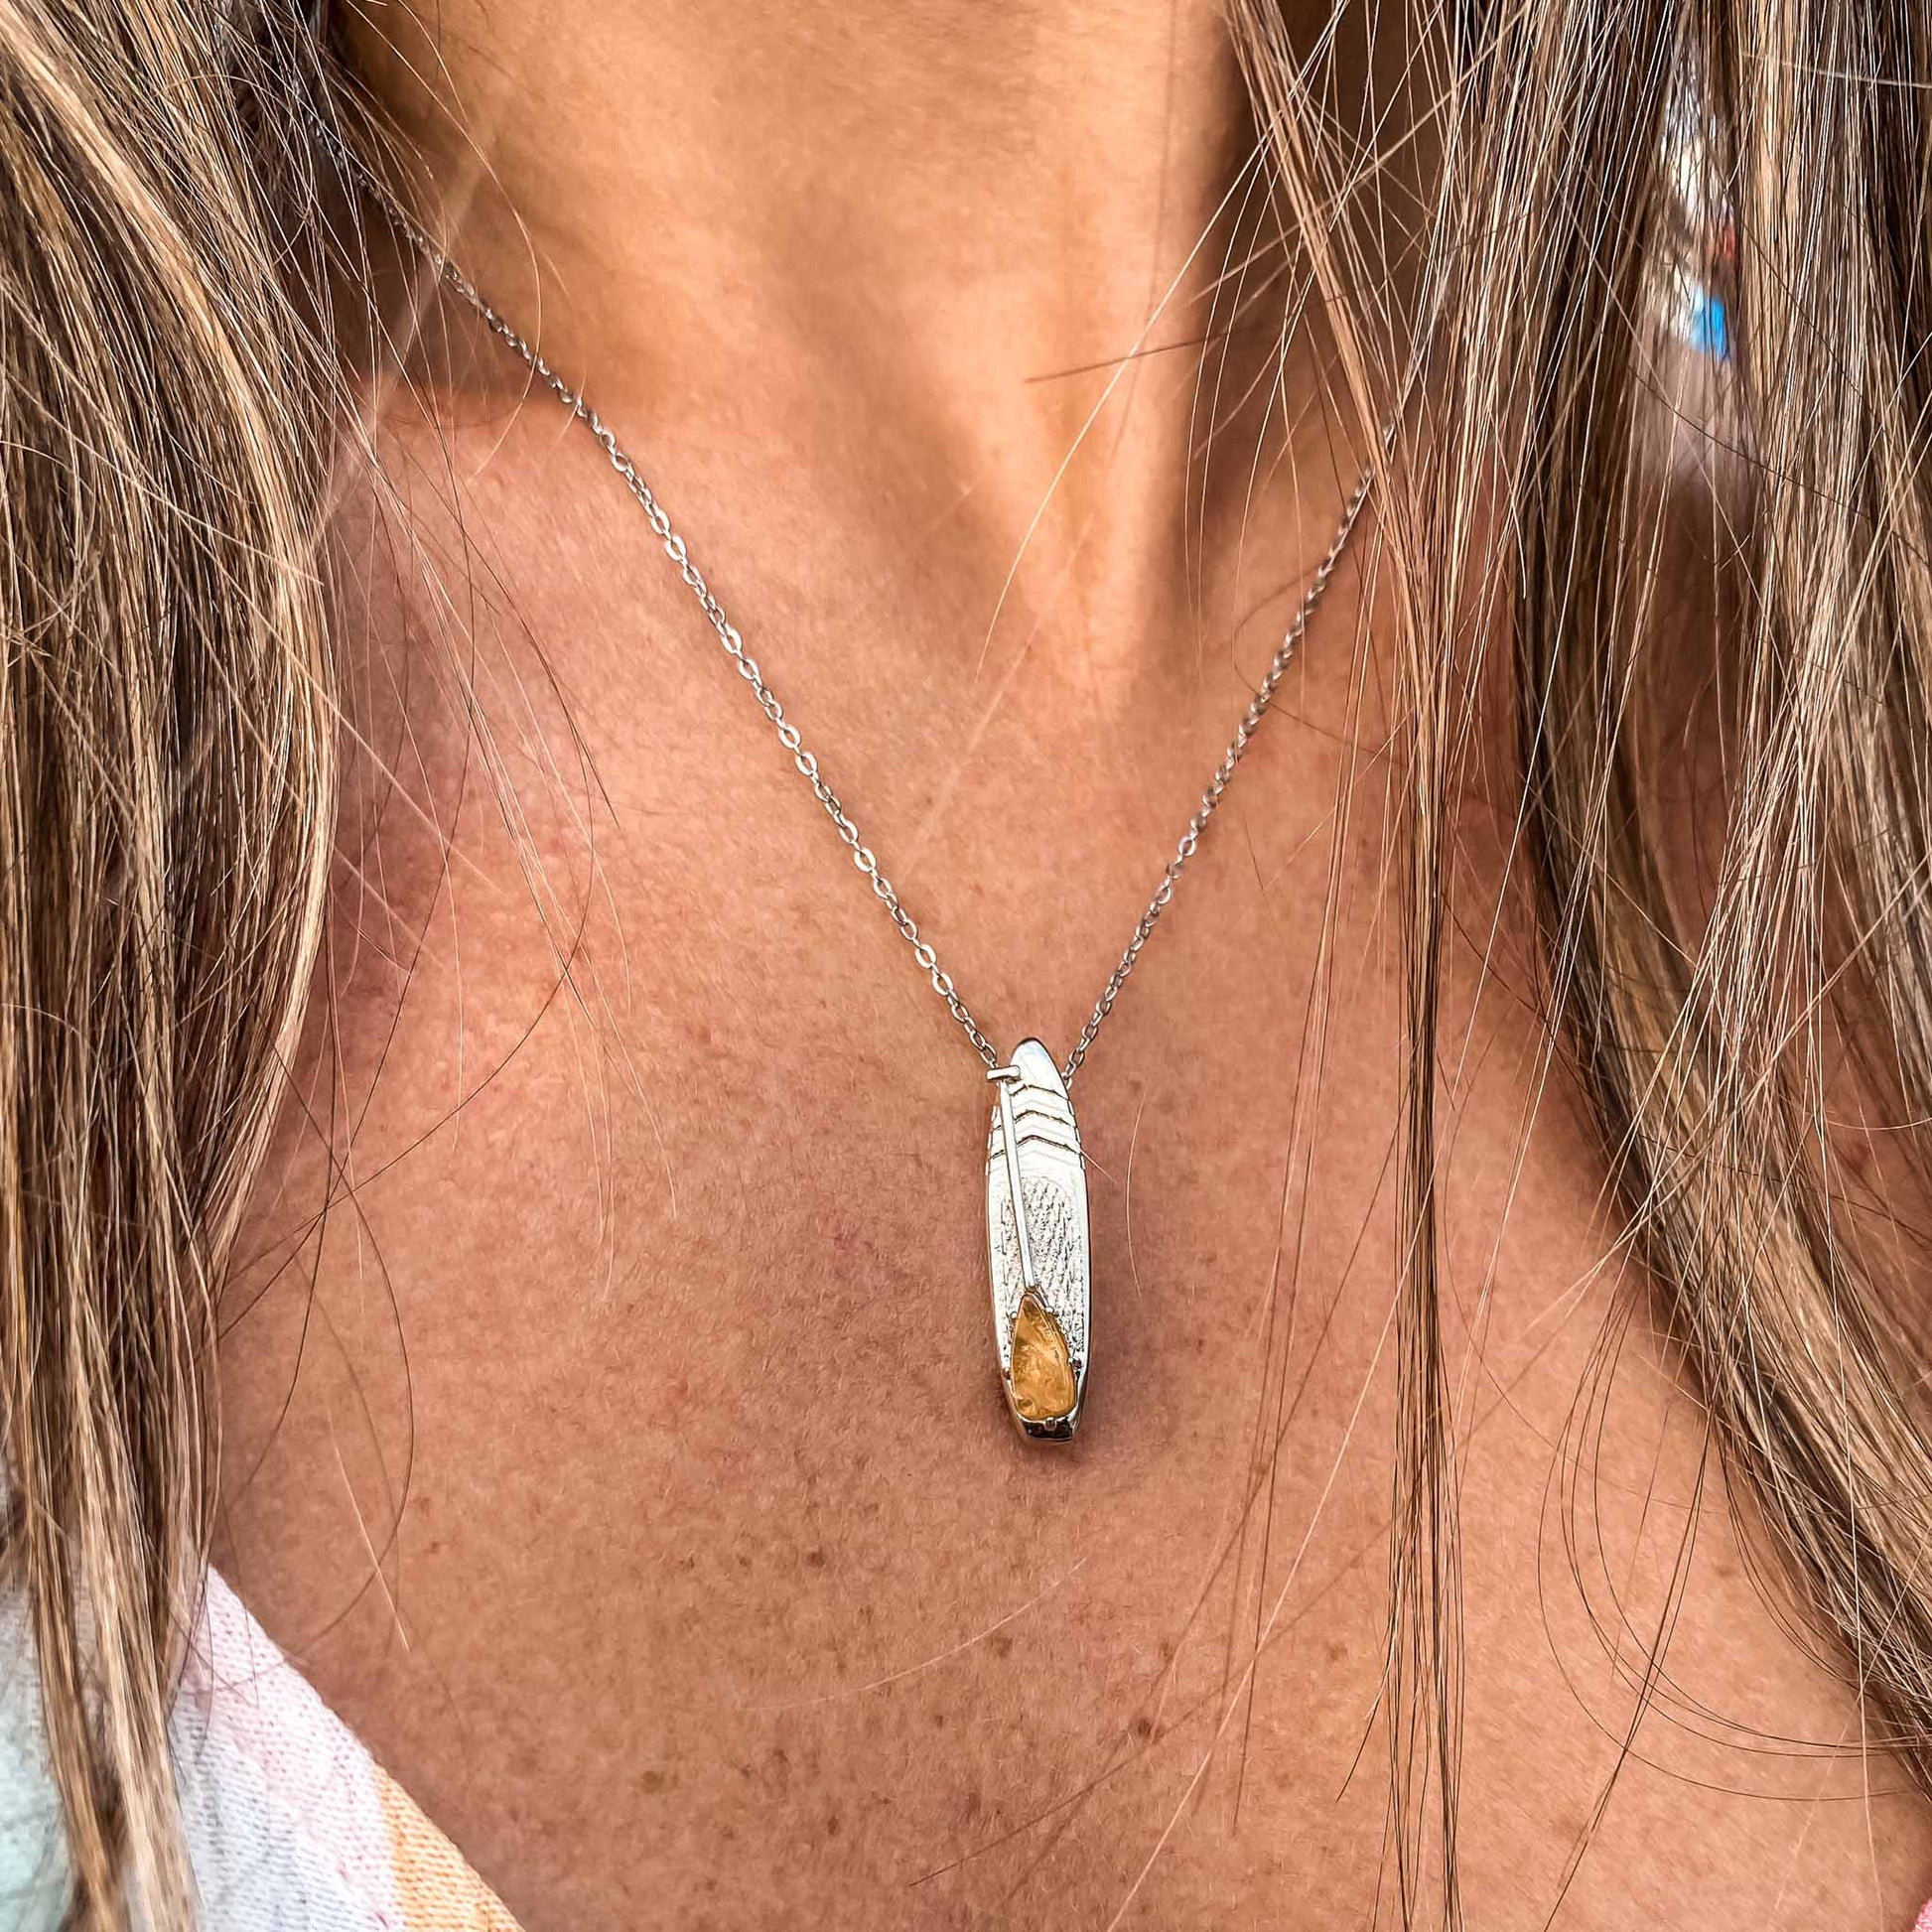 Looking for places to buy or rent a paddle board? This stand up paddle board pendant will be the best and highest performance SUP you'll ever find. Take your paddle board with you, even when you're not surfing, racing or touring. Shop November's birthstone SUP jewelry online or at a surf shop near you.